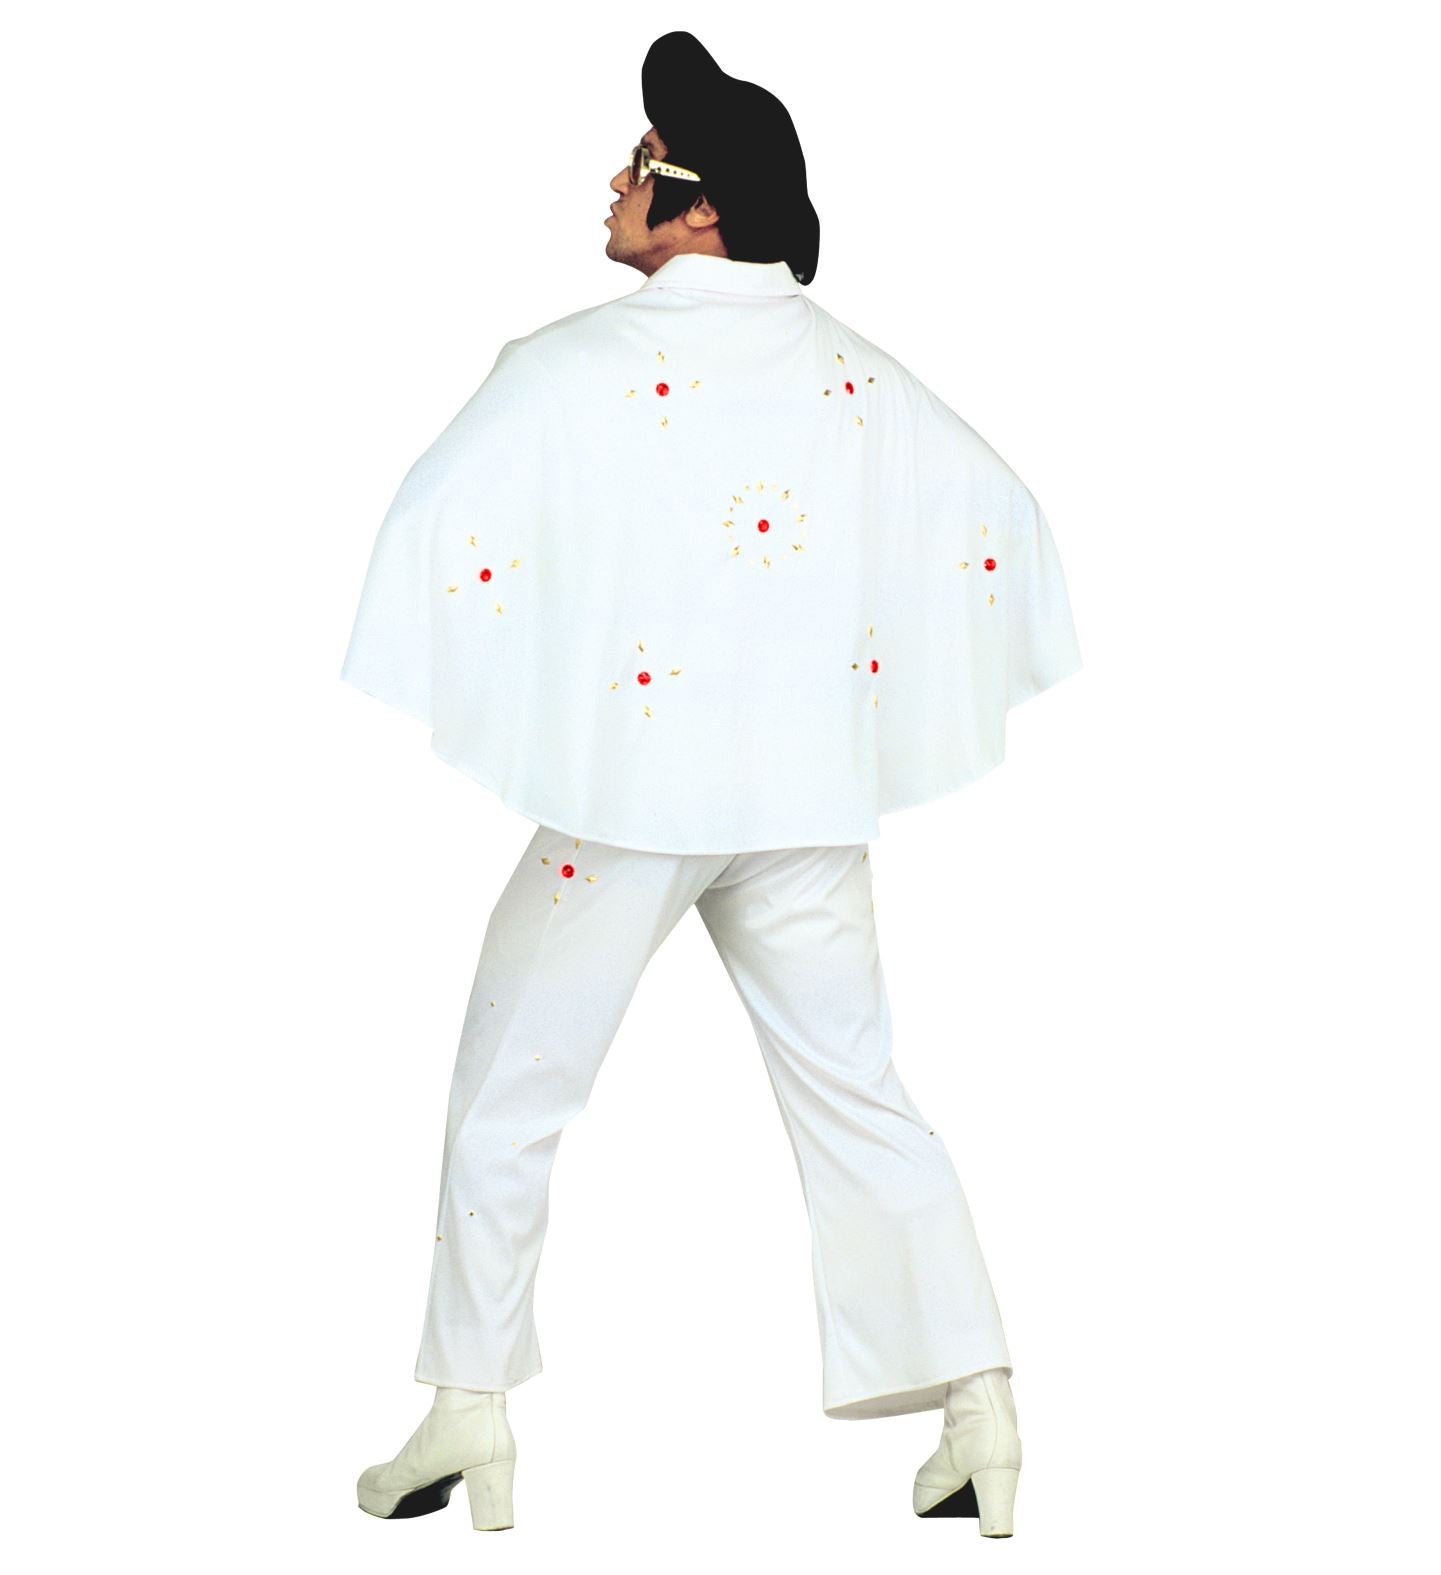 King of Rock and Roll Elvis Costume rear